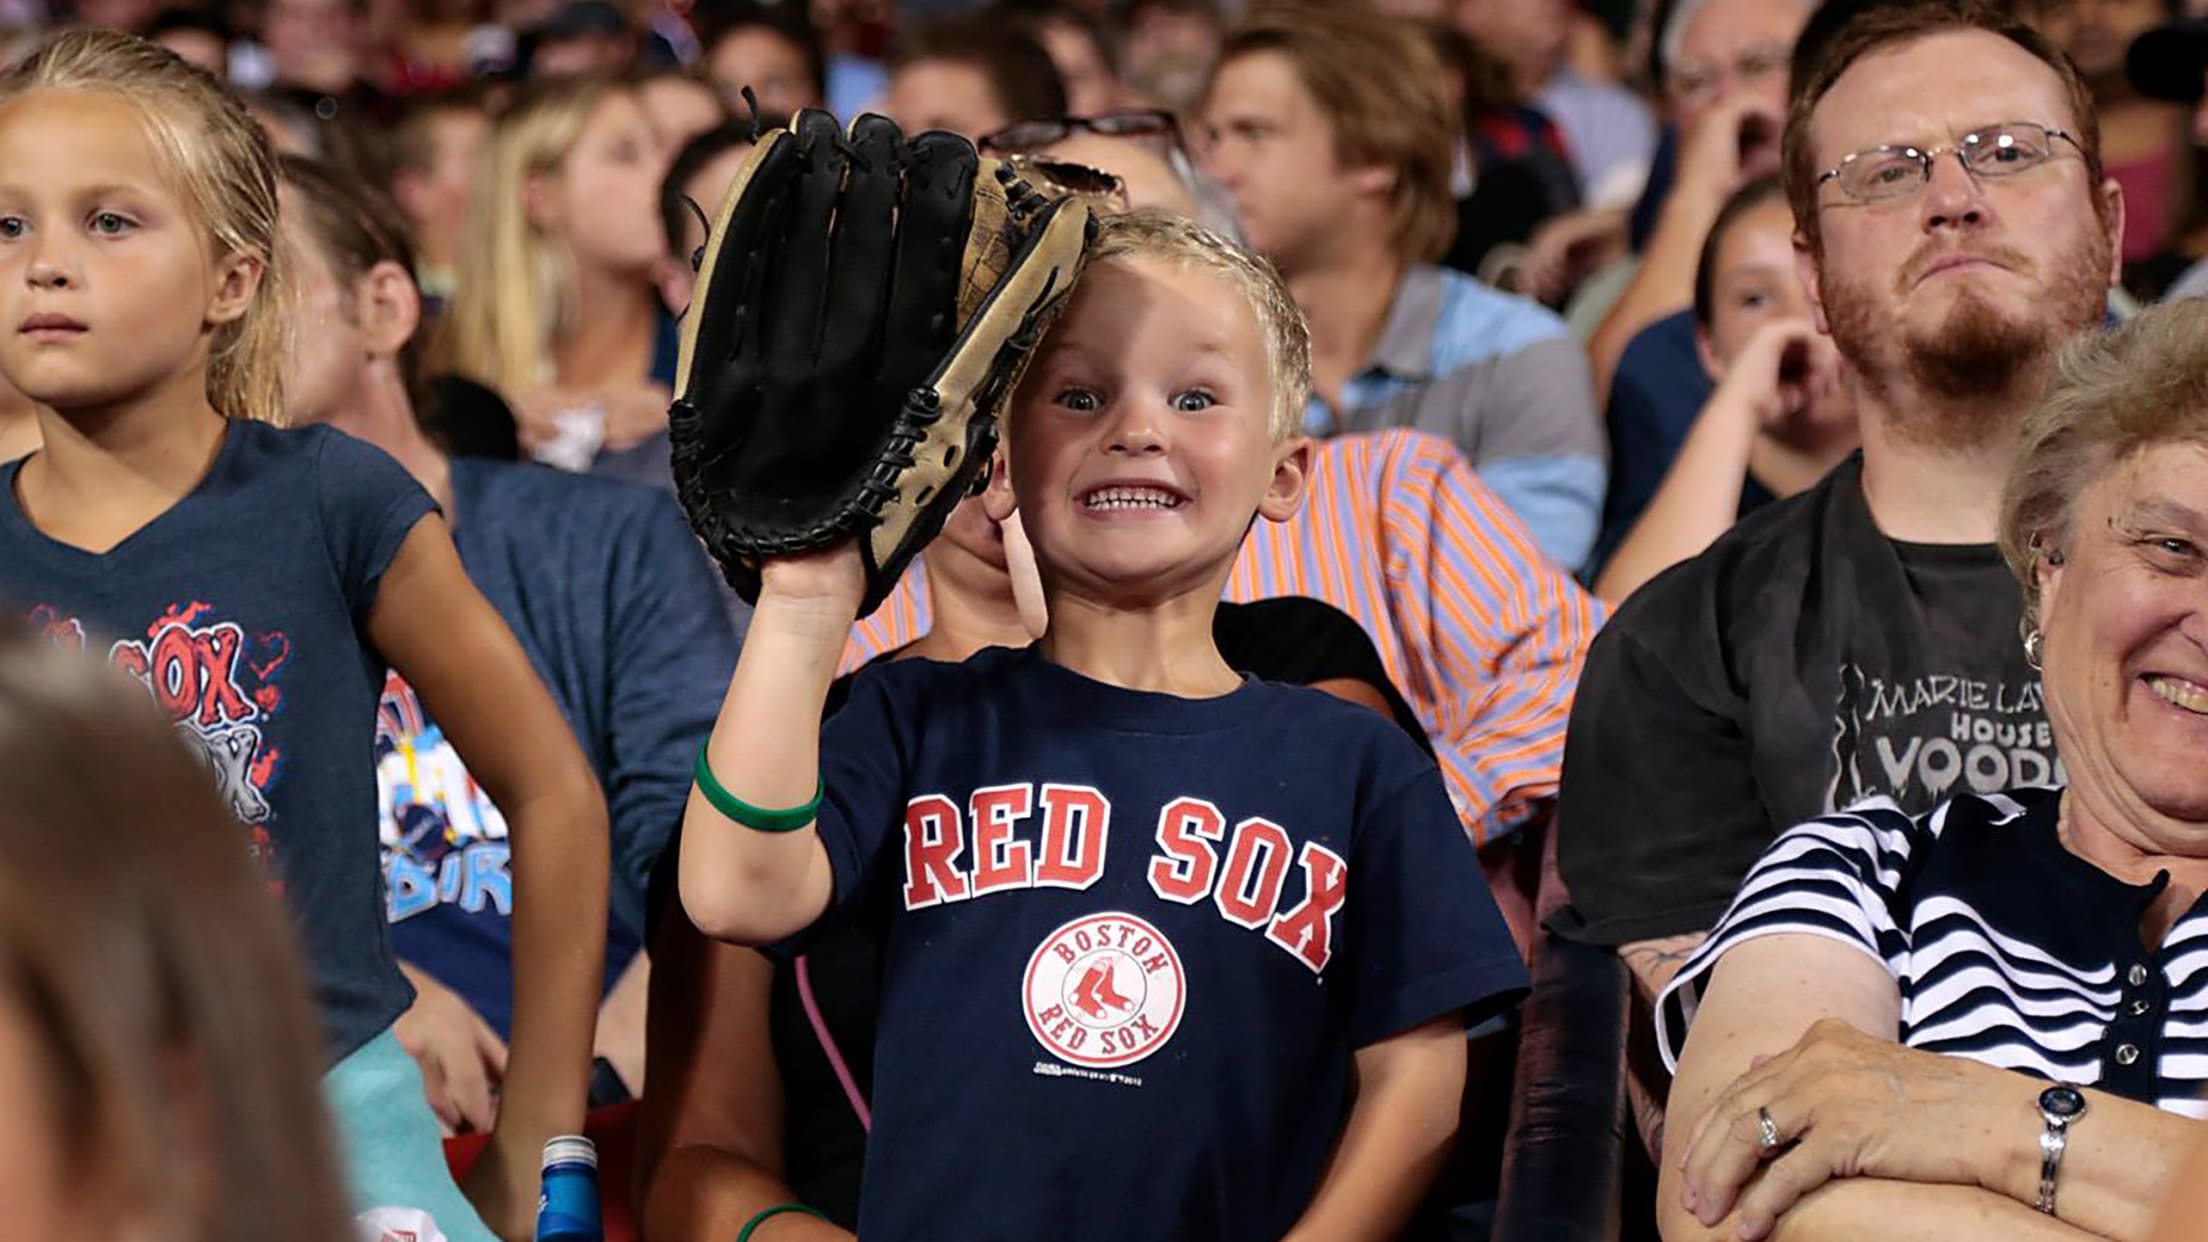 Red Sox fan attends 75th opening day game at Fenway Park